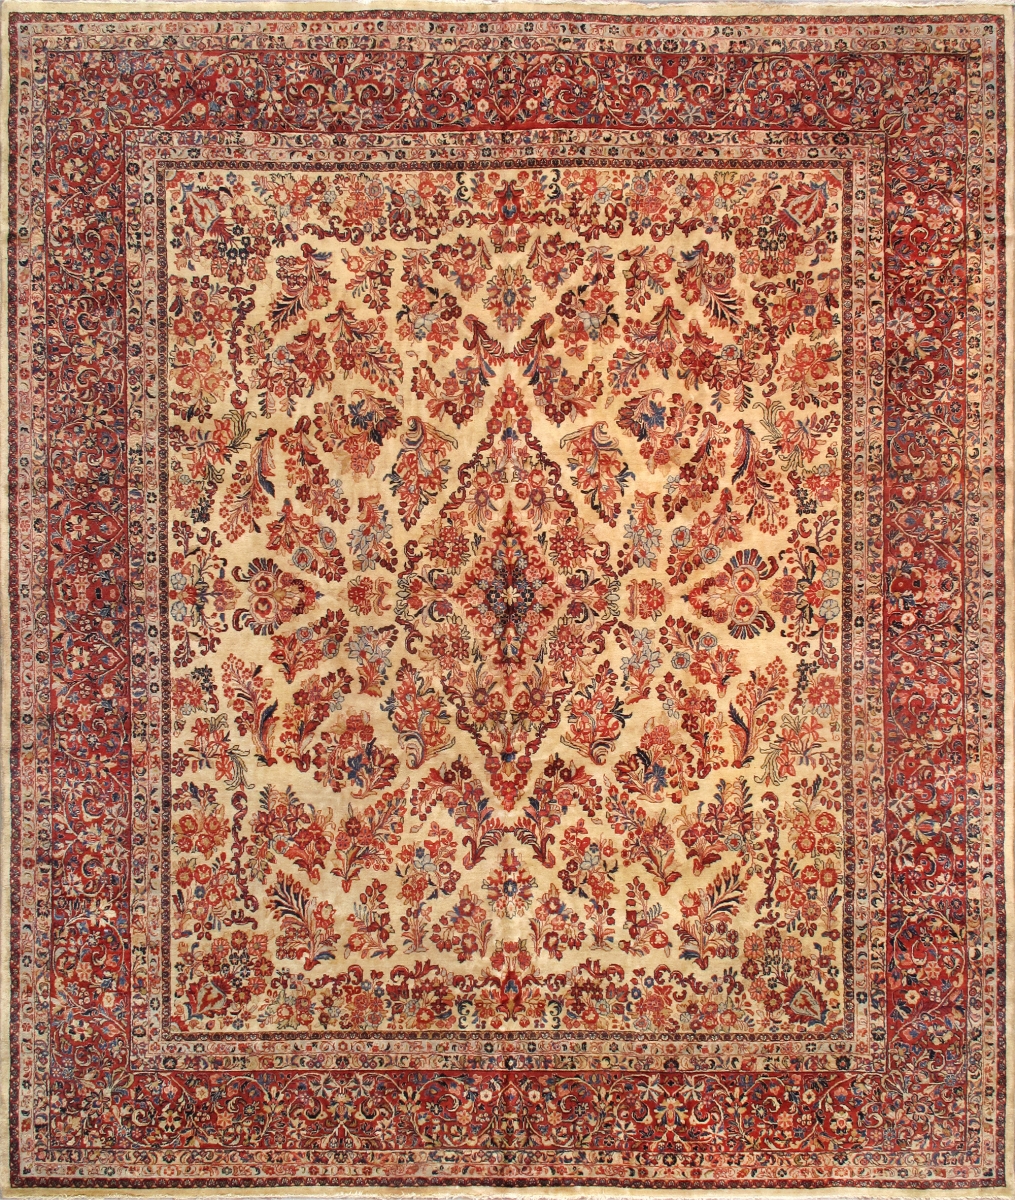 039392  Antique Sarouk Collection Hand-Knotted Lamb's Wool Area Rug-11'10' X 13'11', Ivory/Burgundy -  Pasargad Home